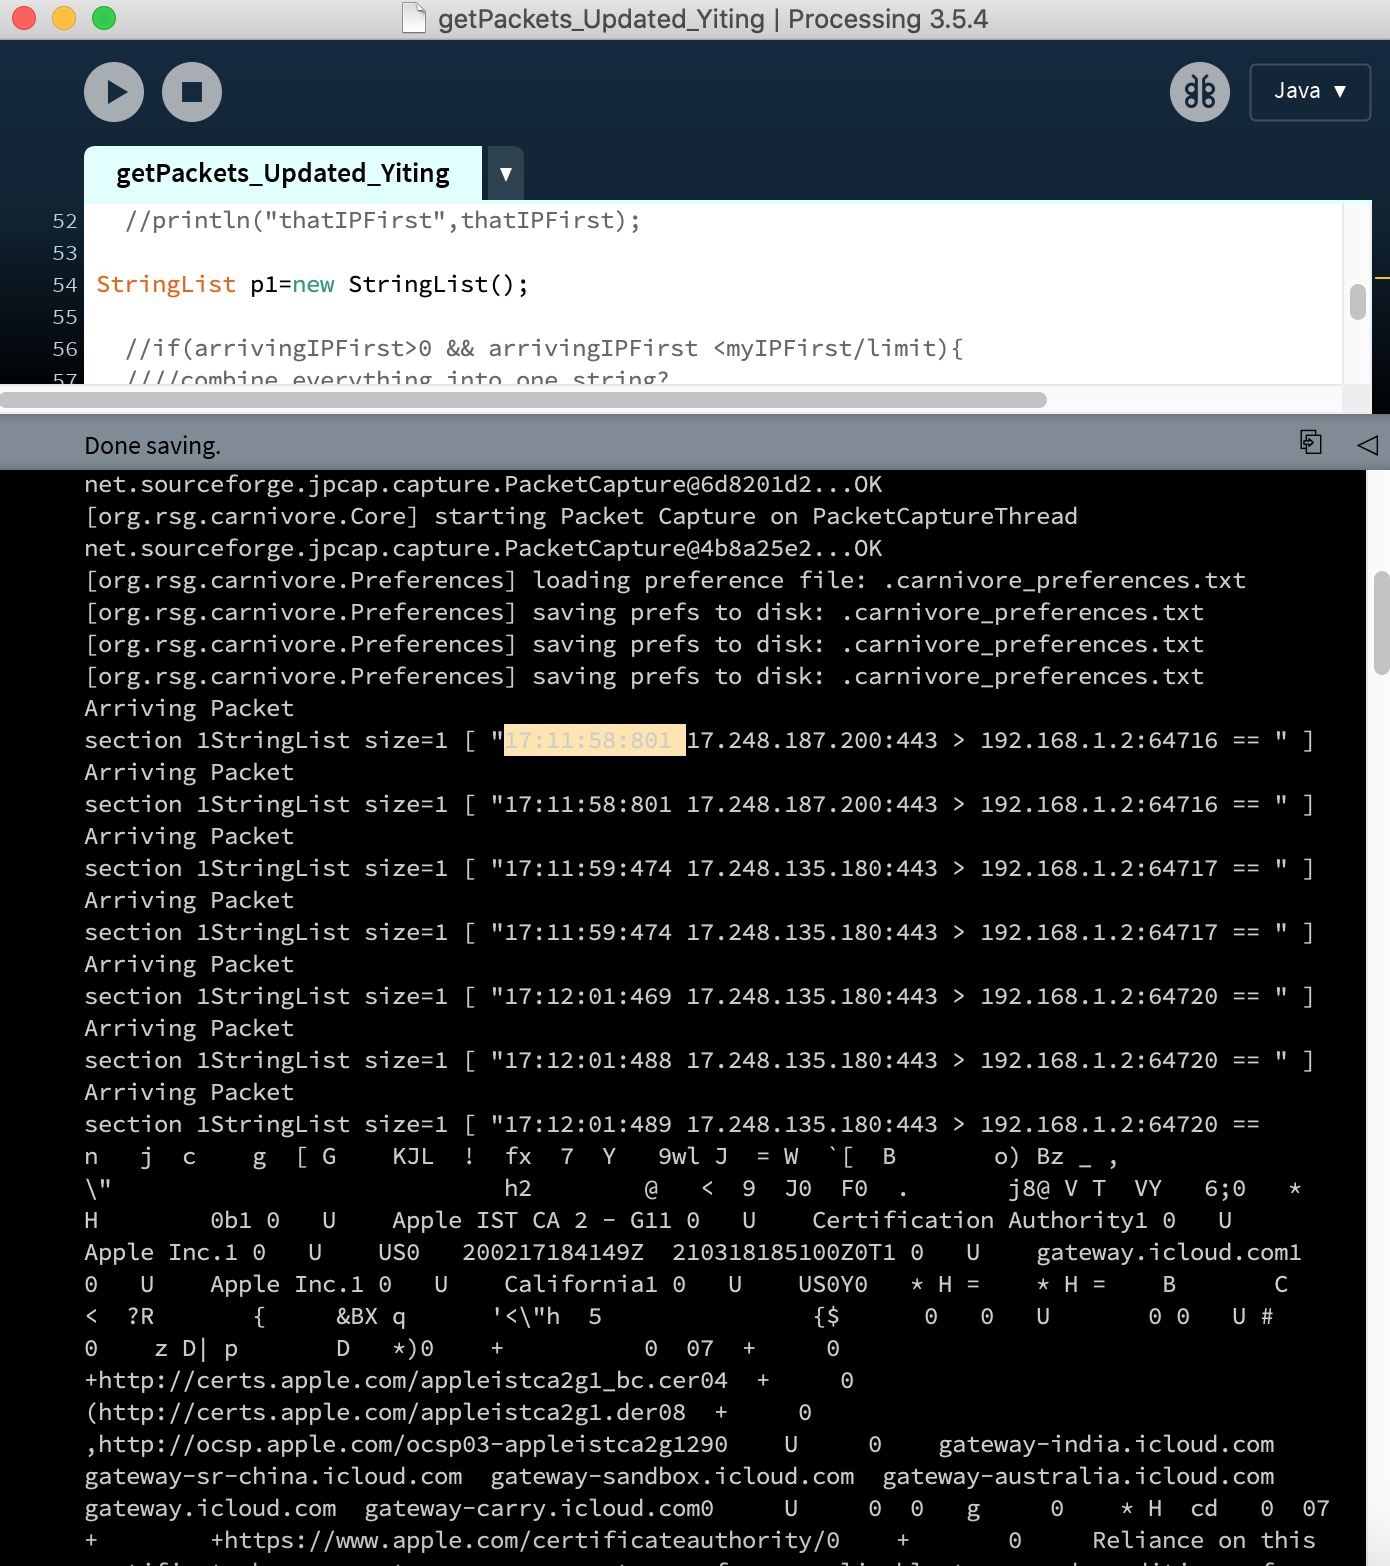 screenshot of processing getting packets from server using Carnivore library.